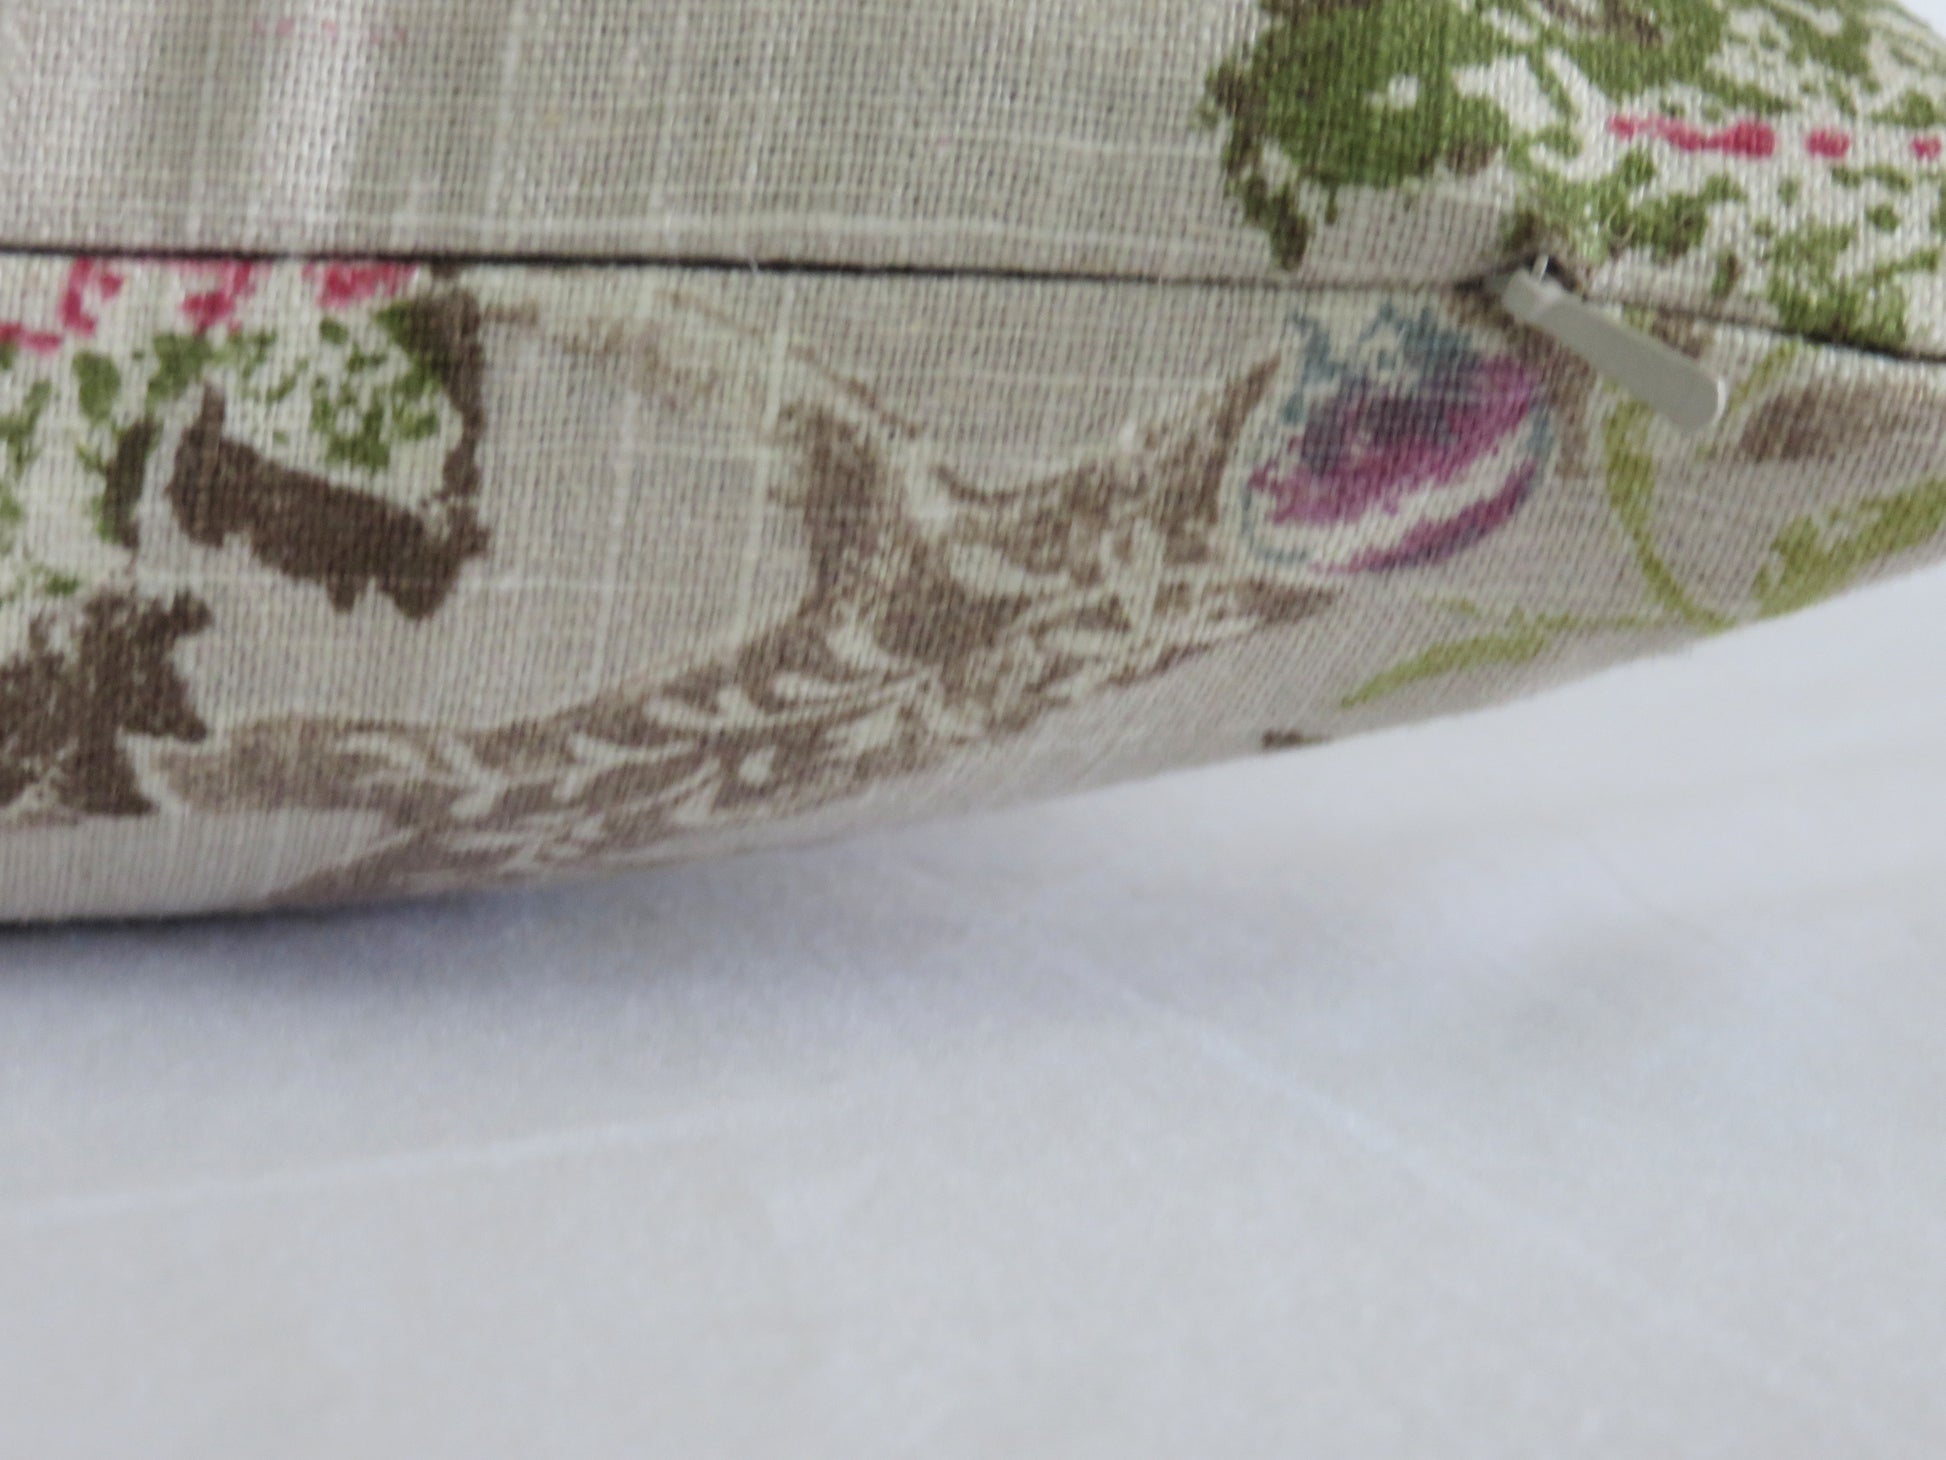 beige and pink linen floral pillow cover made from P kaufmann retreat fabric in clover